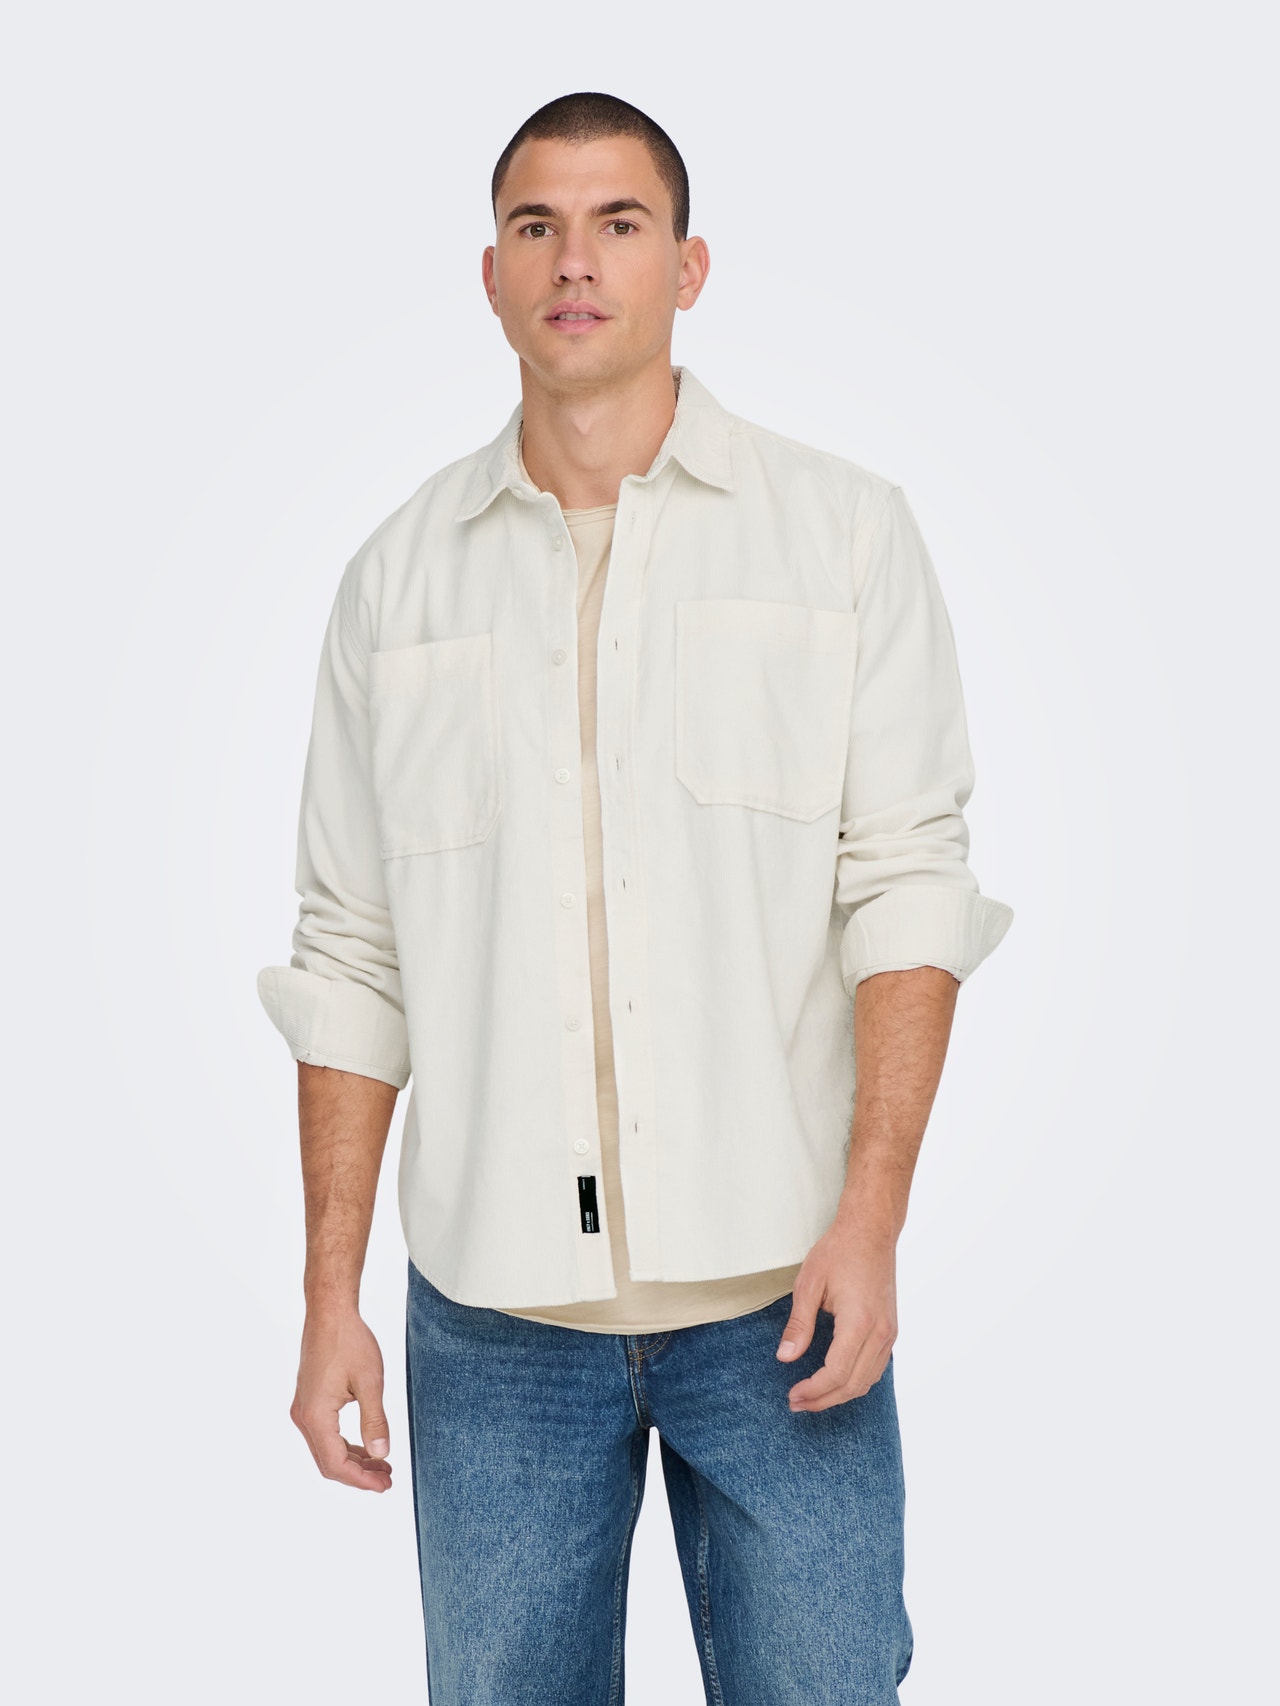 ONLY & SONS Solid colored Corduroy shirt -Cloud Dancer - 22024716